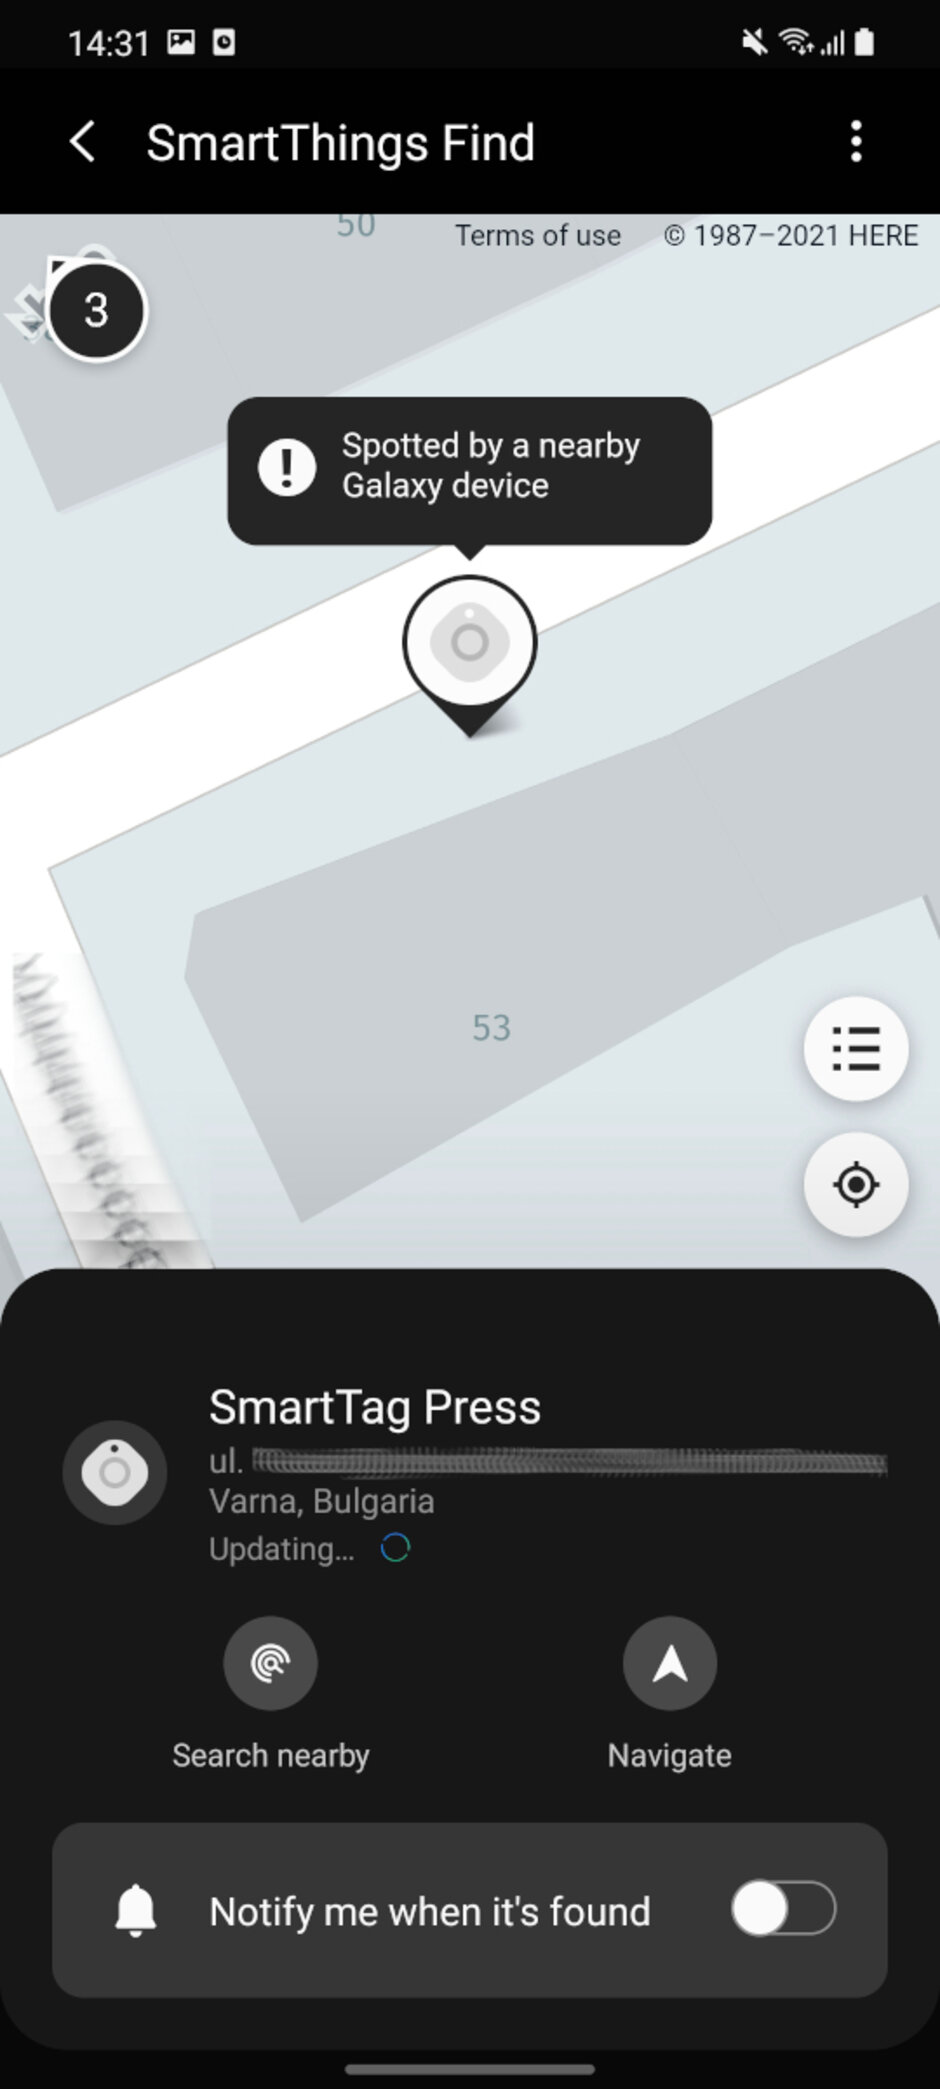 Samsung Galaxy SmartTag review: The "Where's my thing?" lifesaver